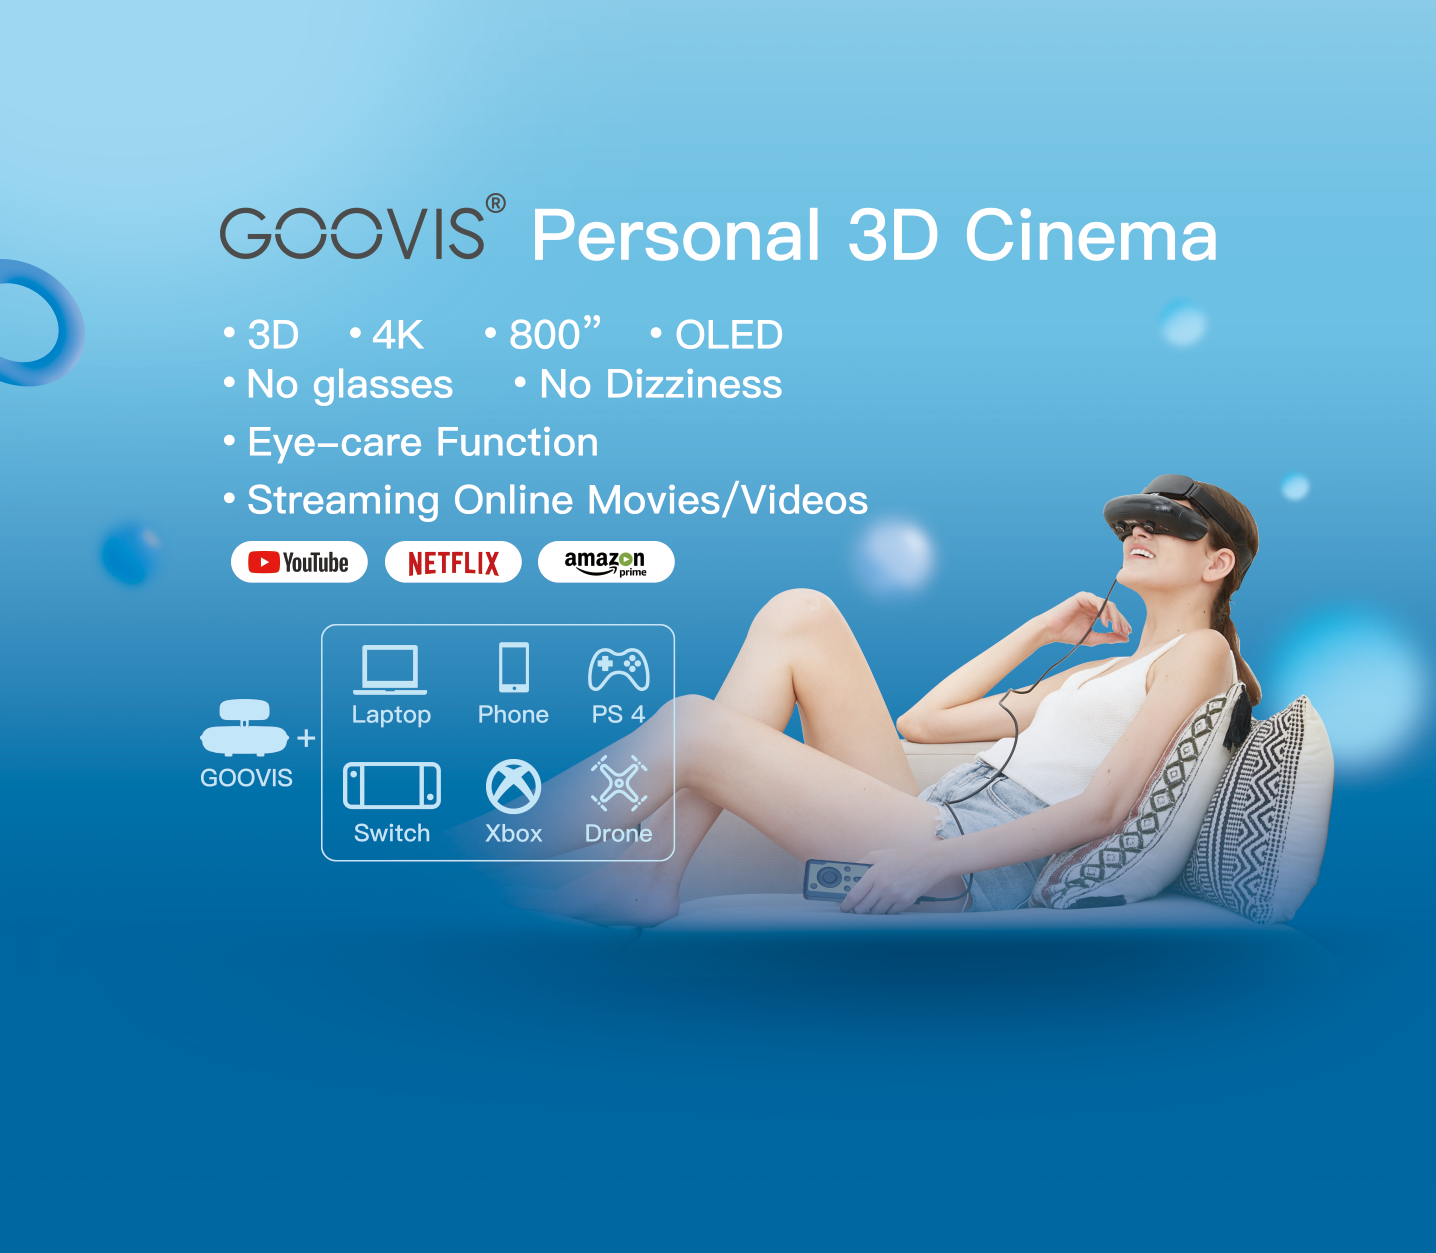  GOOVIS Pro AMOLED Display, Blu-Ray 2D / 3D Glasses HMD Support  4K Blue-ray 3D Movies,Netflix Prime Video Hulu Apple TV+  Video  Movies Compatible with PS5 and Gaming Consoles HDMI connectable 